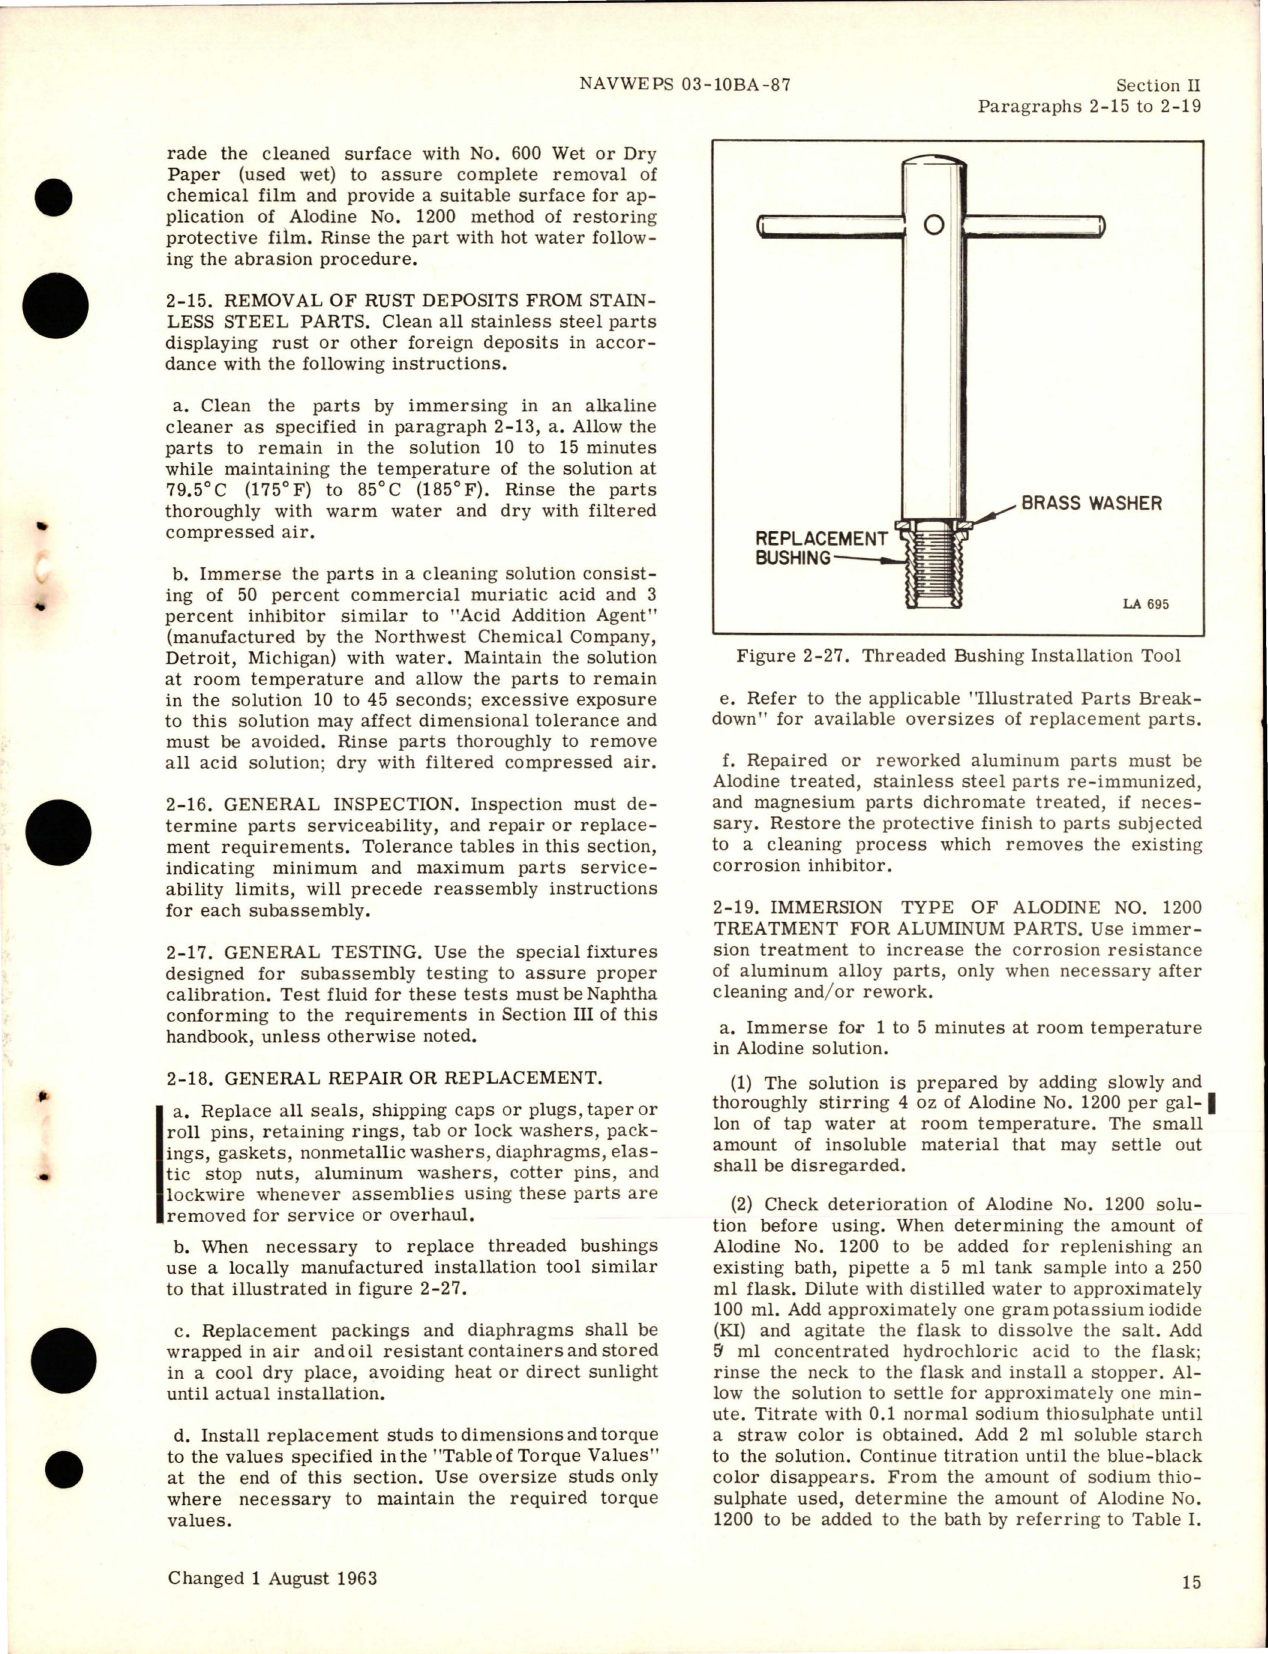 Sample page 5 from AirCorps Library document: Overhaul Instructions for Injection Carburetor - Model PR-58E5